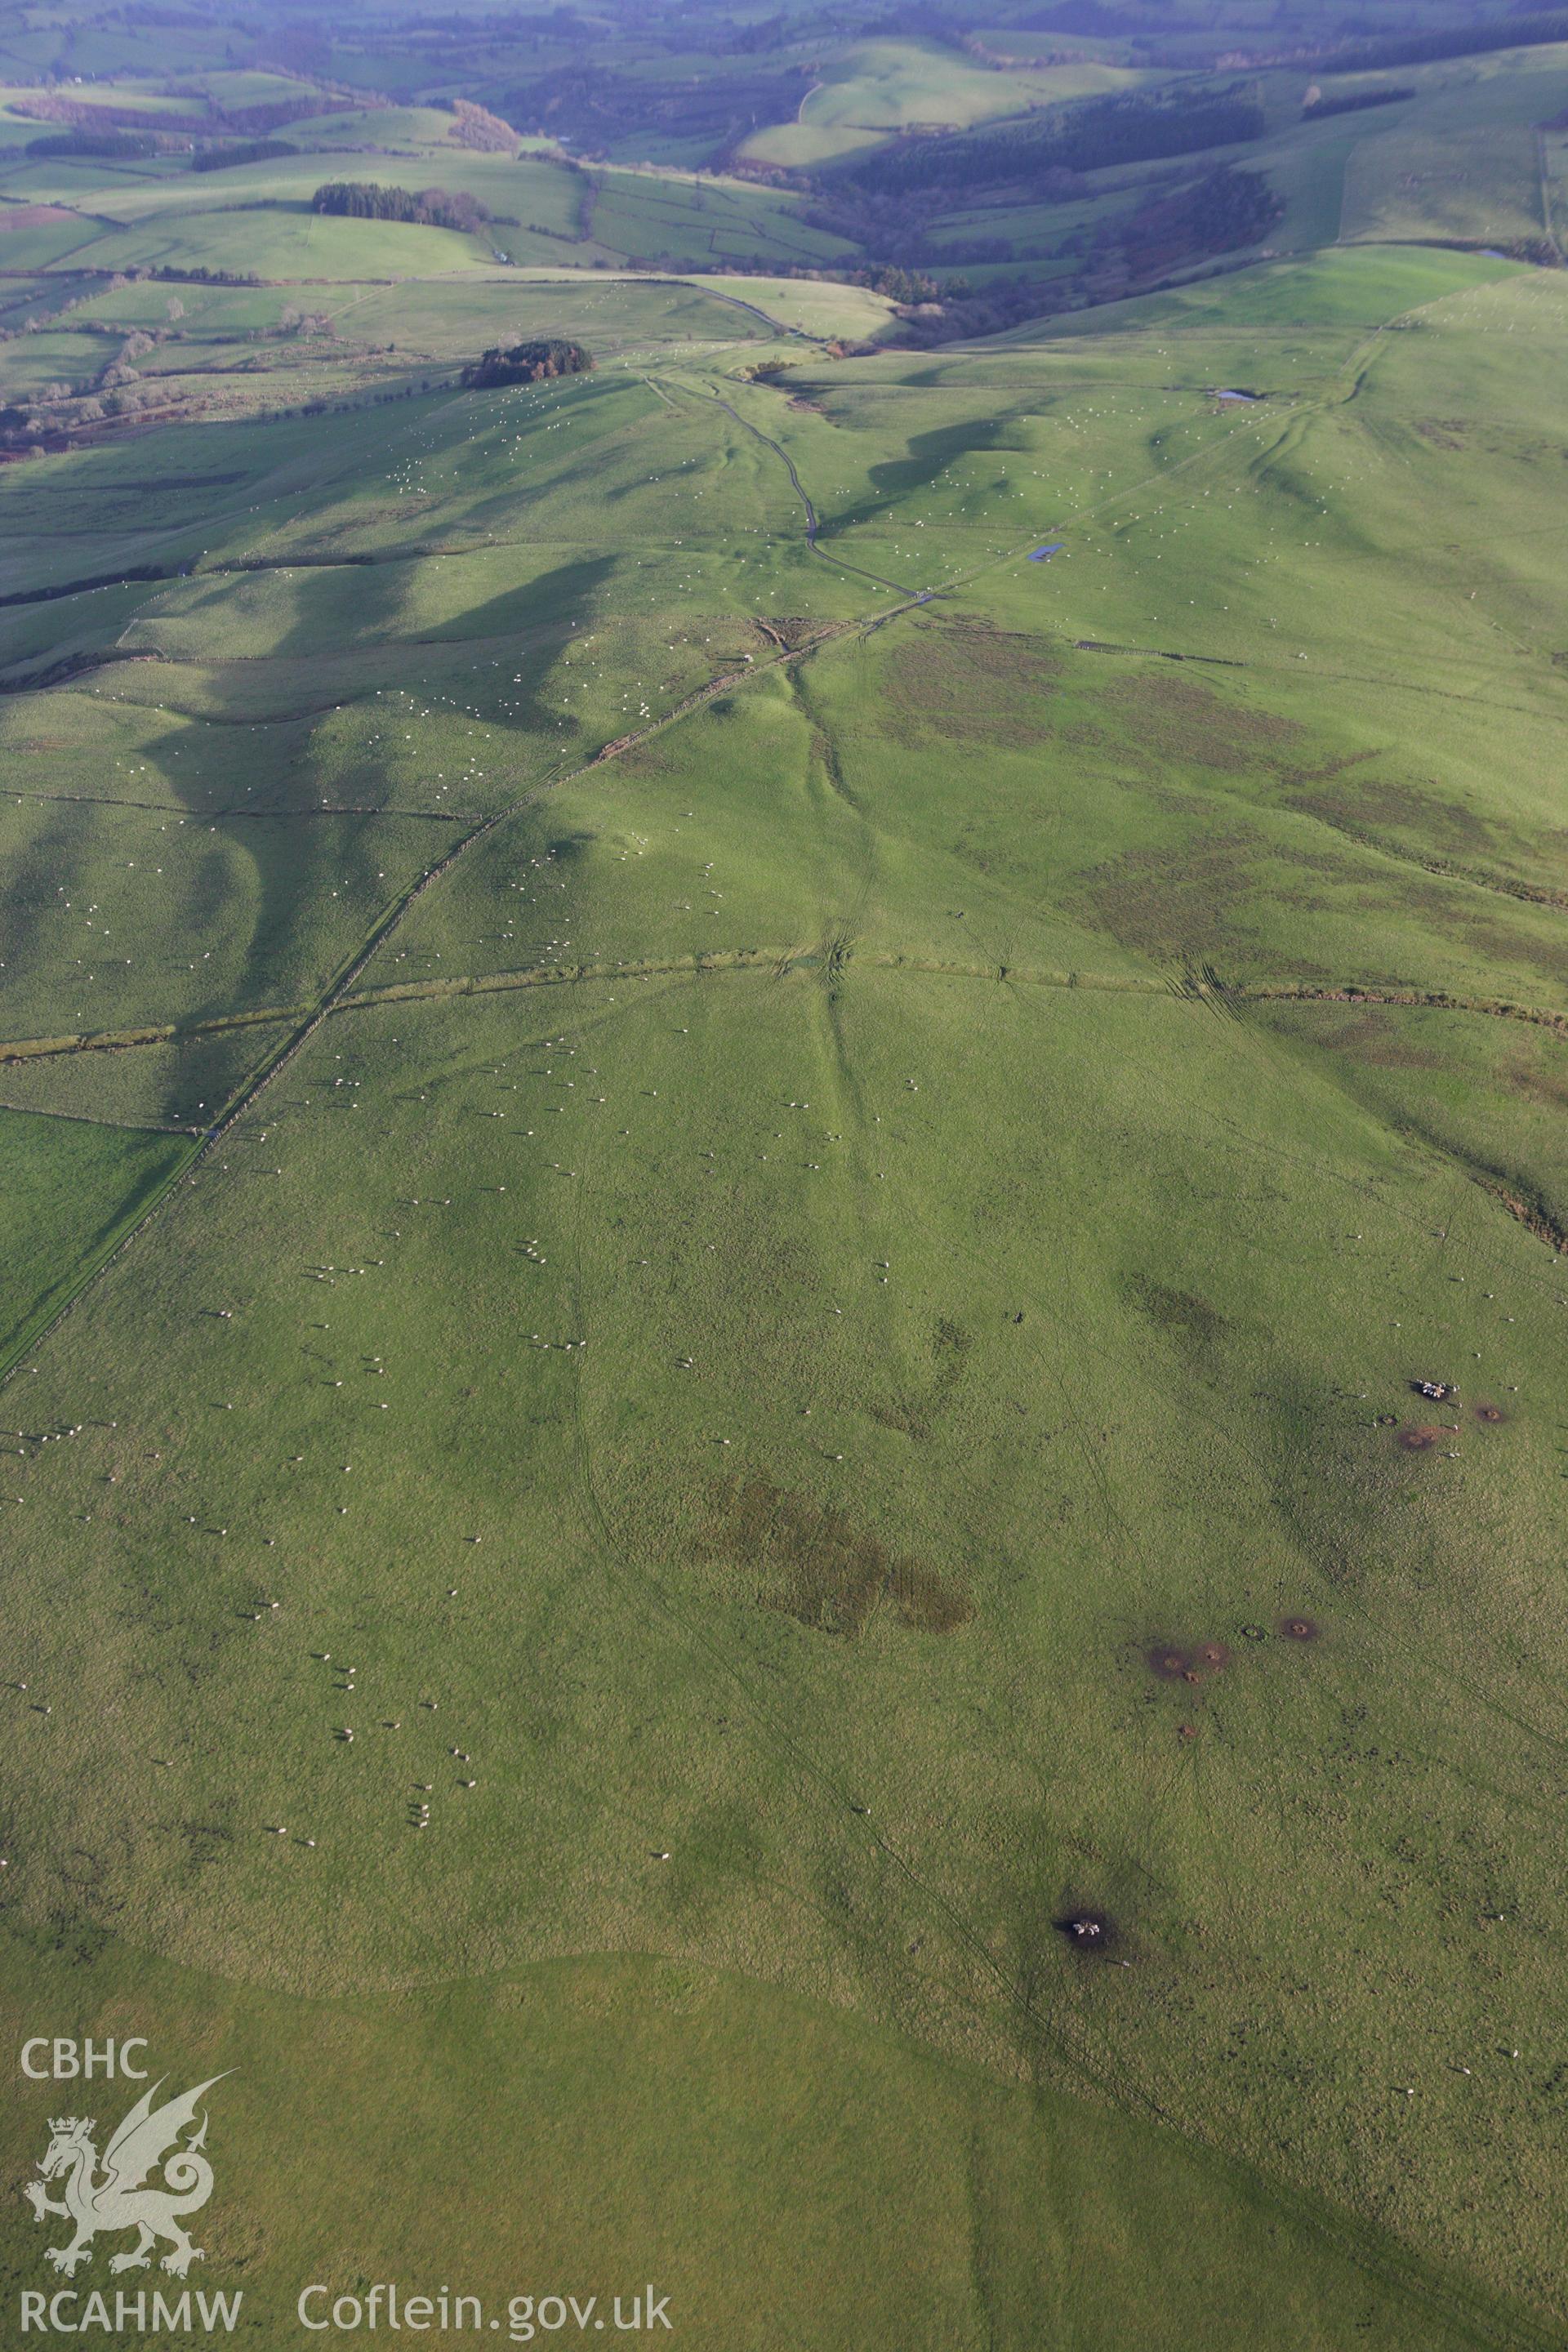 RCAHMW colour oblique aerial photograph of braided trackways on Kerry Hill. An old road crossing Two Tumps. Taken on 10 December 2009 by Toby Driver